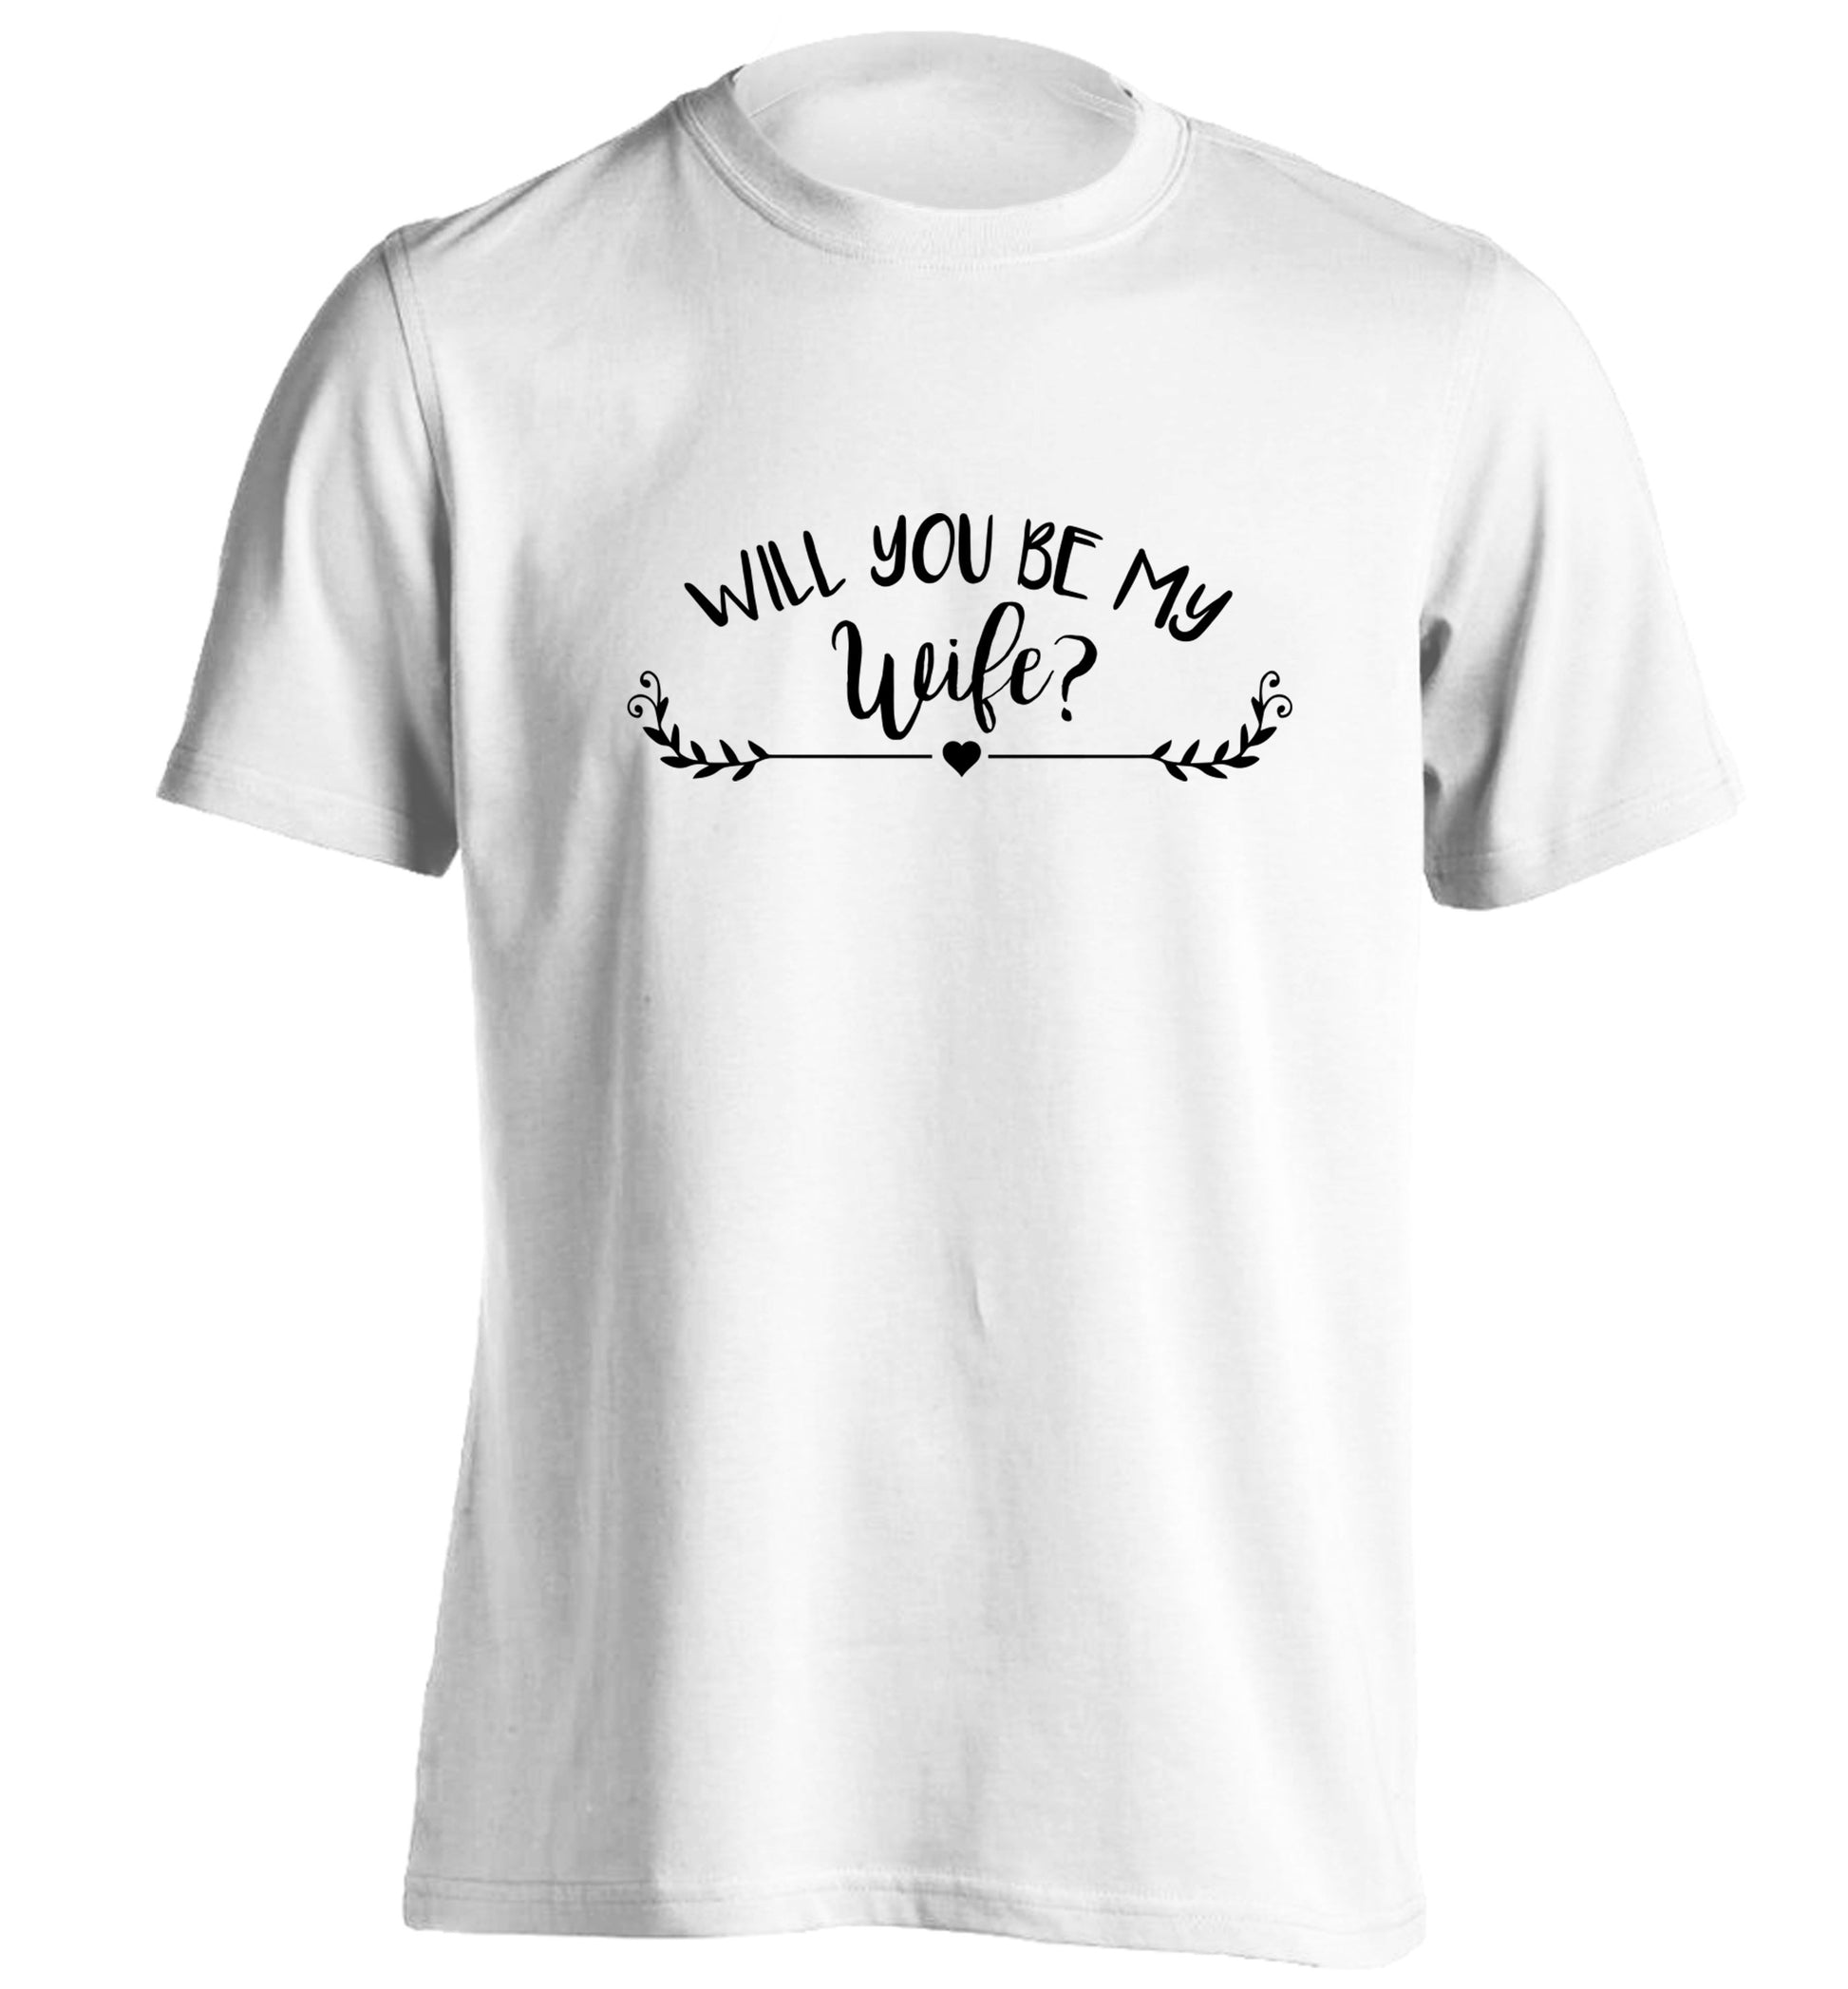 Will you be my wife? adults unisex white Tshirt 2XL